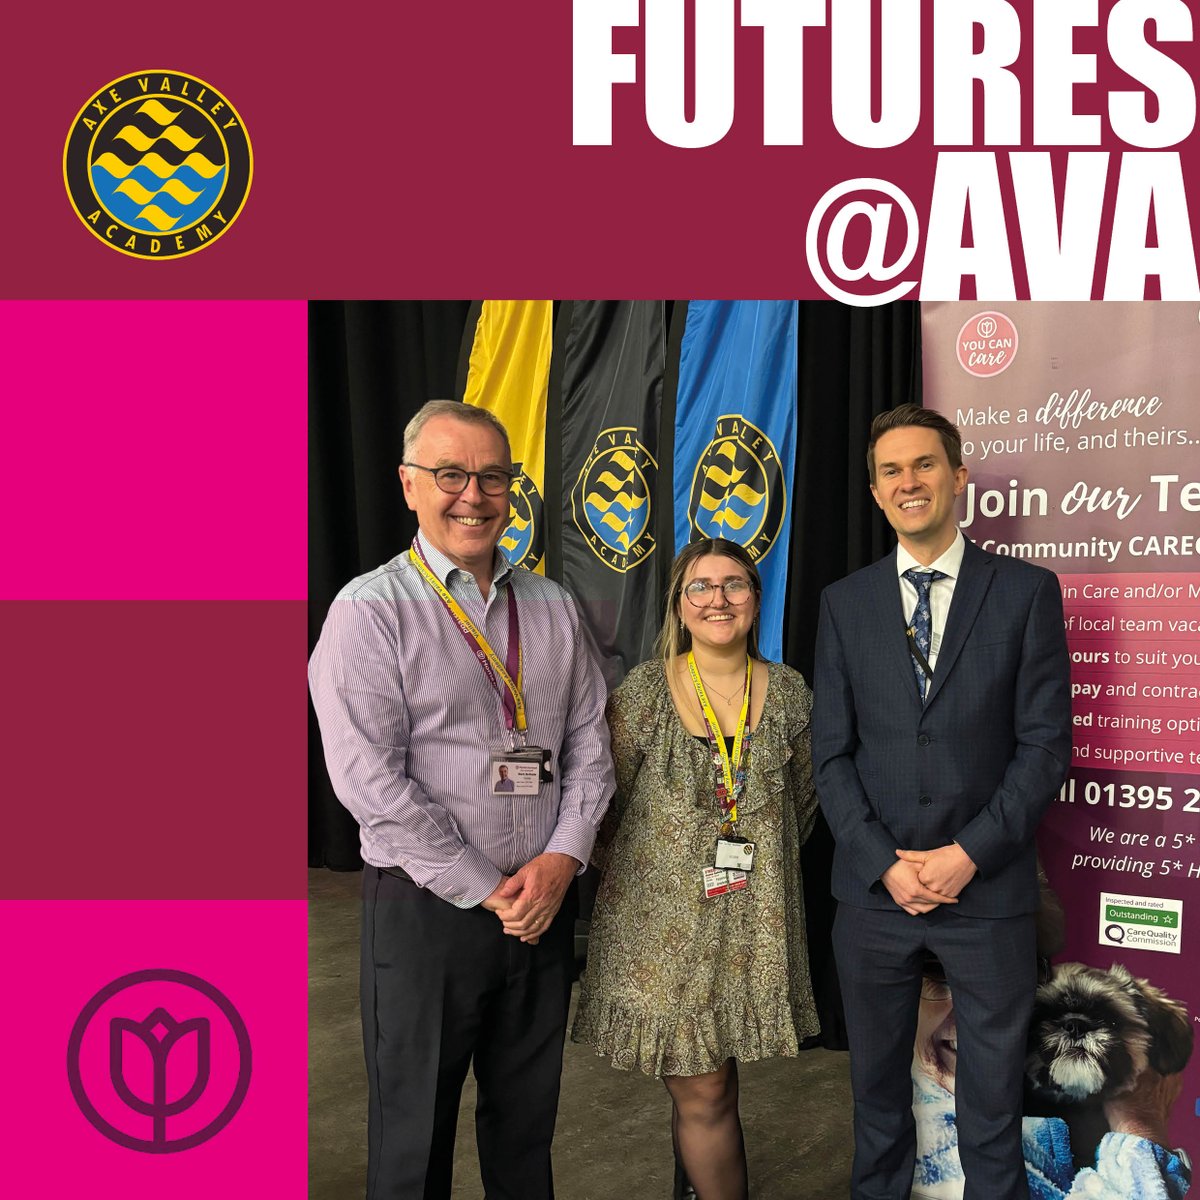 As part of our FUTURES@AVA programme we were delighted to welcome Mark and ex-@AxeAcademy  student Emily from Home Instead UK to talk to our Health and Social Care students about careers within the care profession. #futures@ava #weareava #smallbutmighty